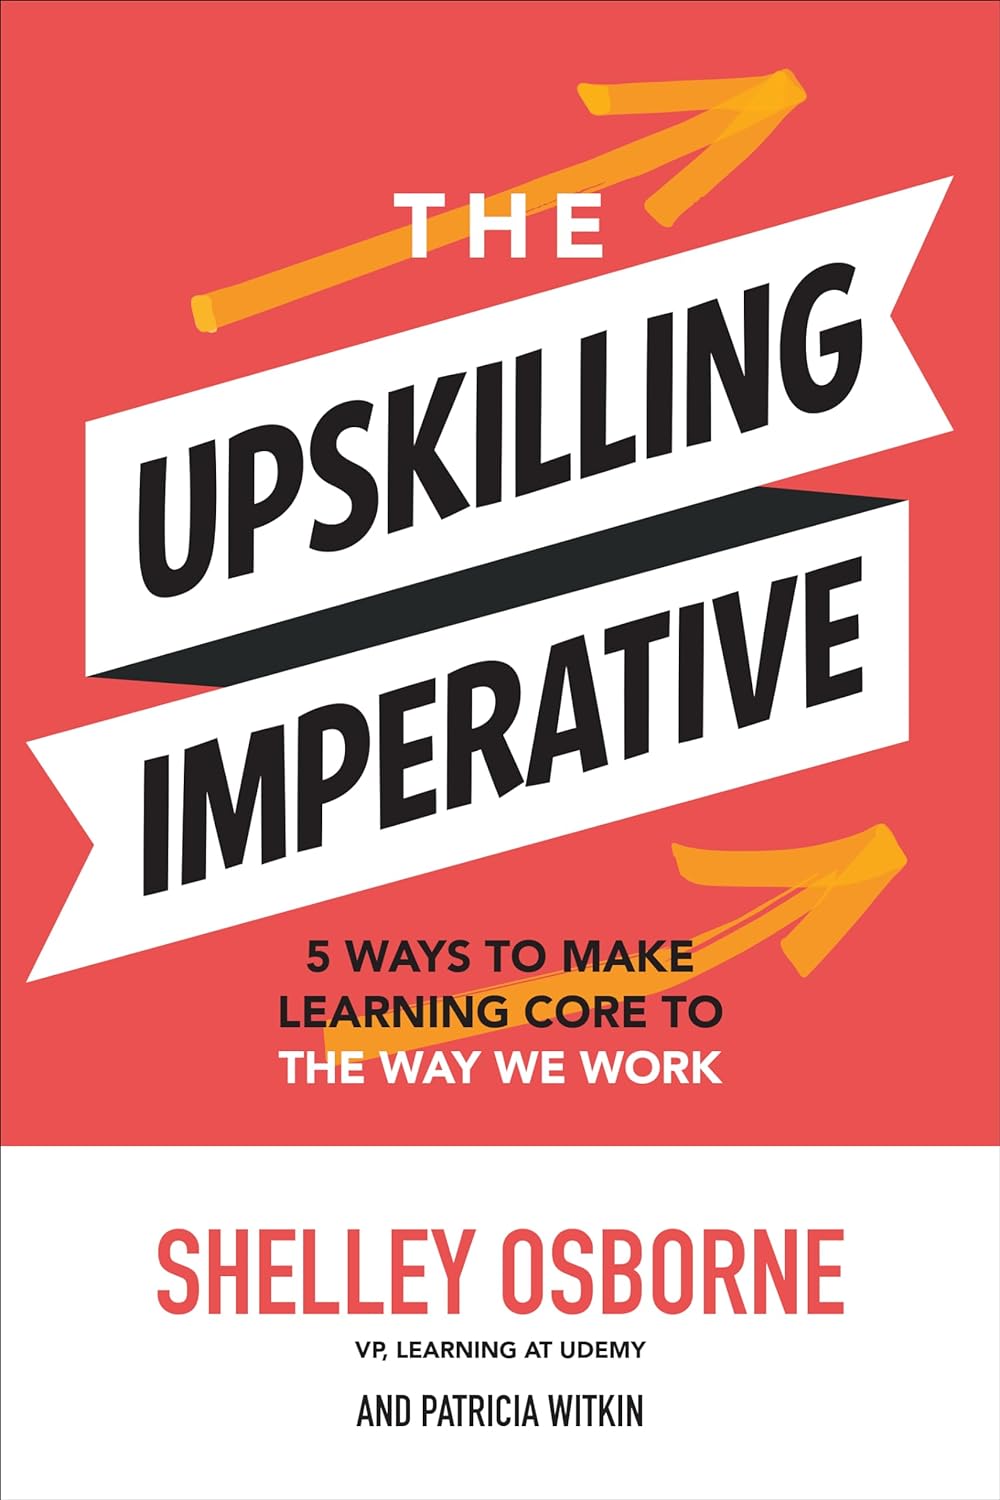 The Upskilling Imperative: 5 Ways to Make Learning Core to the Way We Work de Shelley Osborne